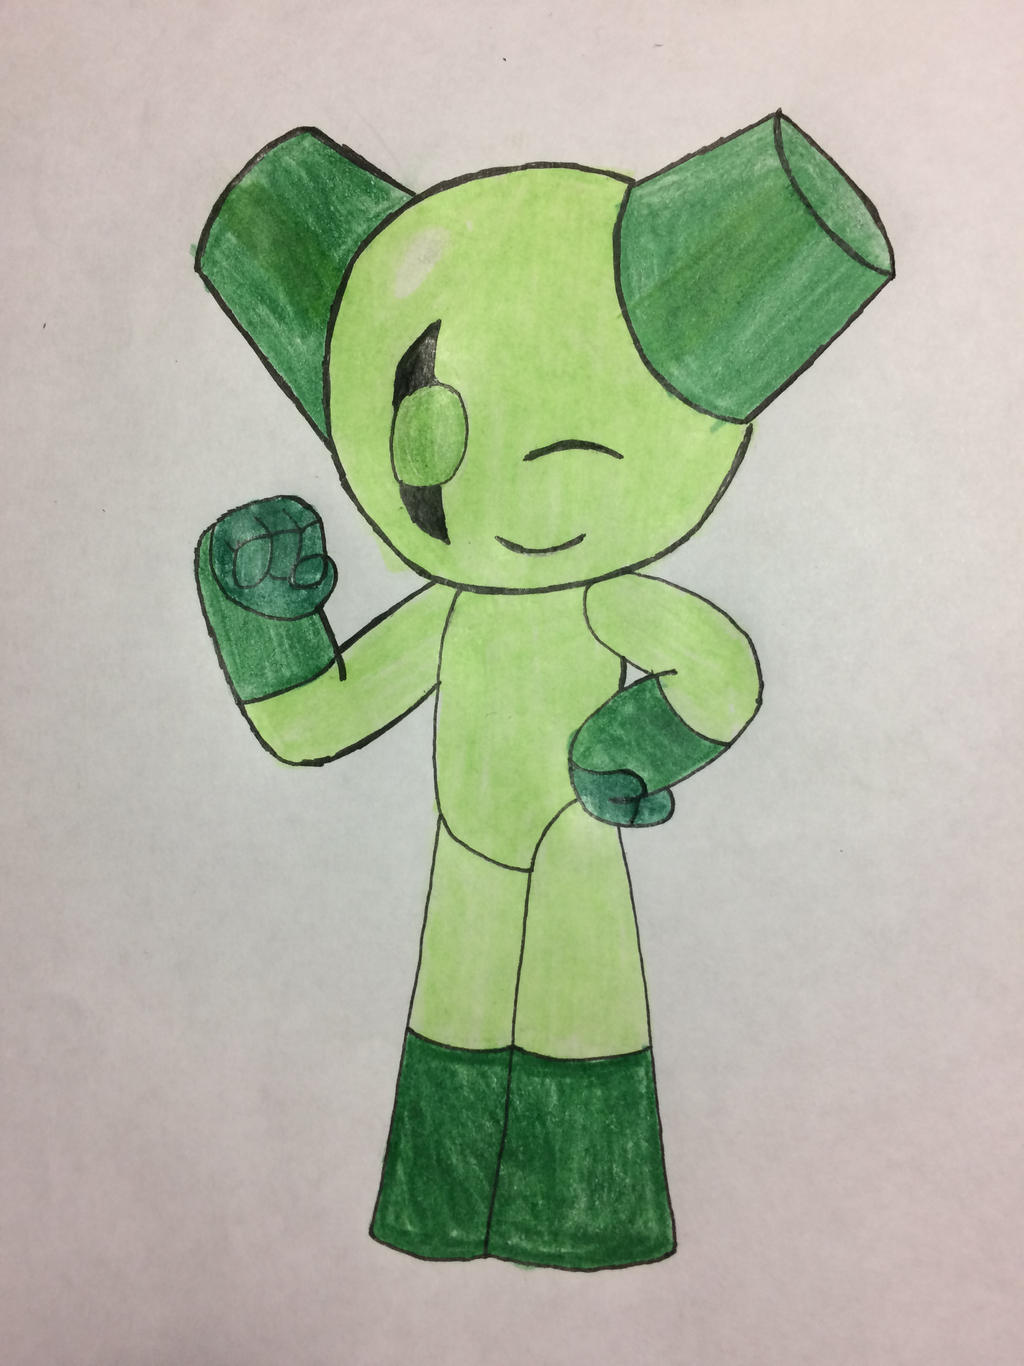 Weekly drawing - A Robot by Brollonks on DeviantArt